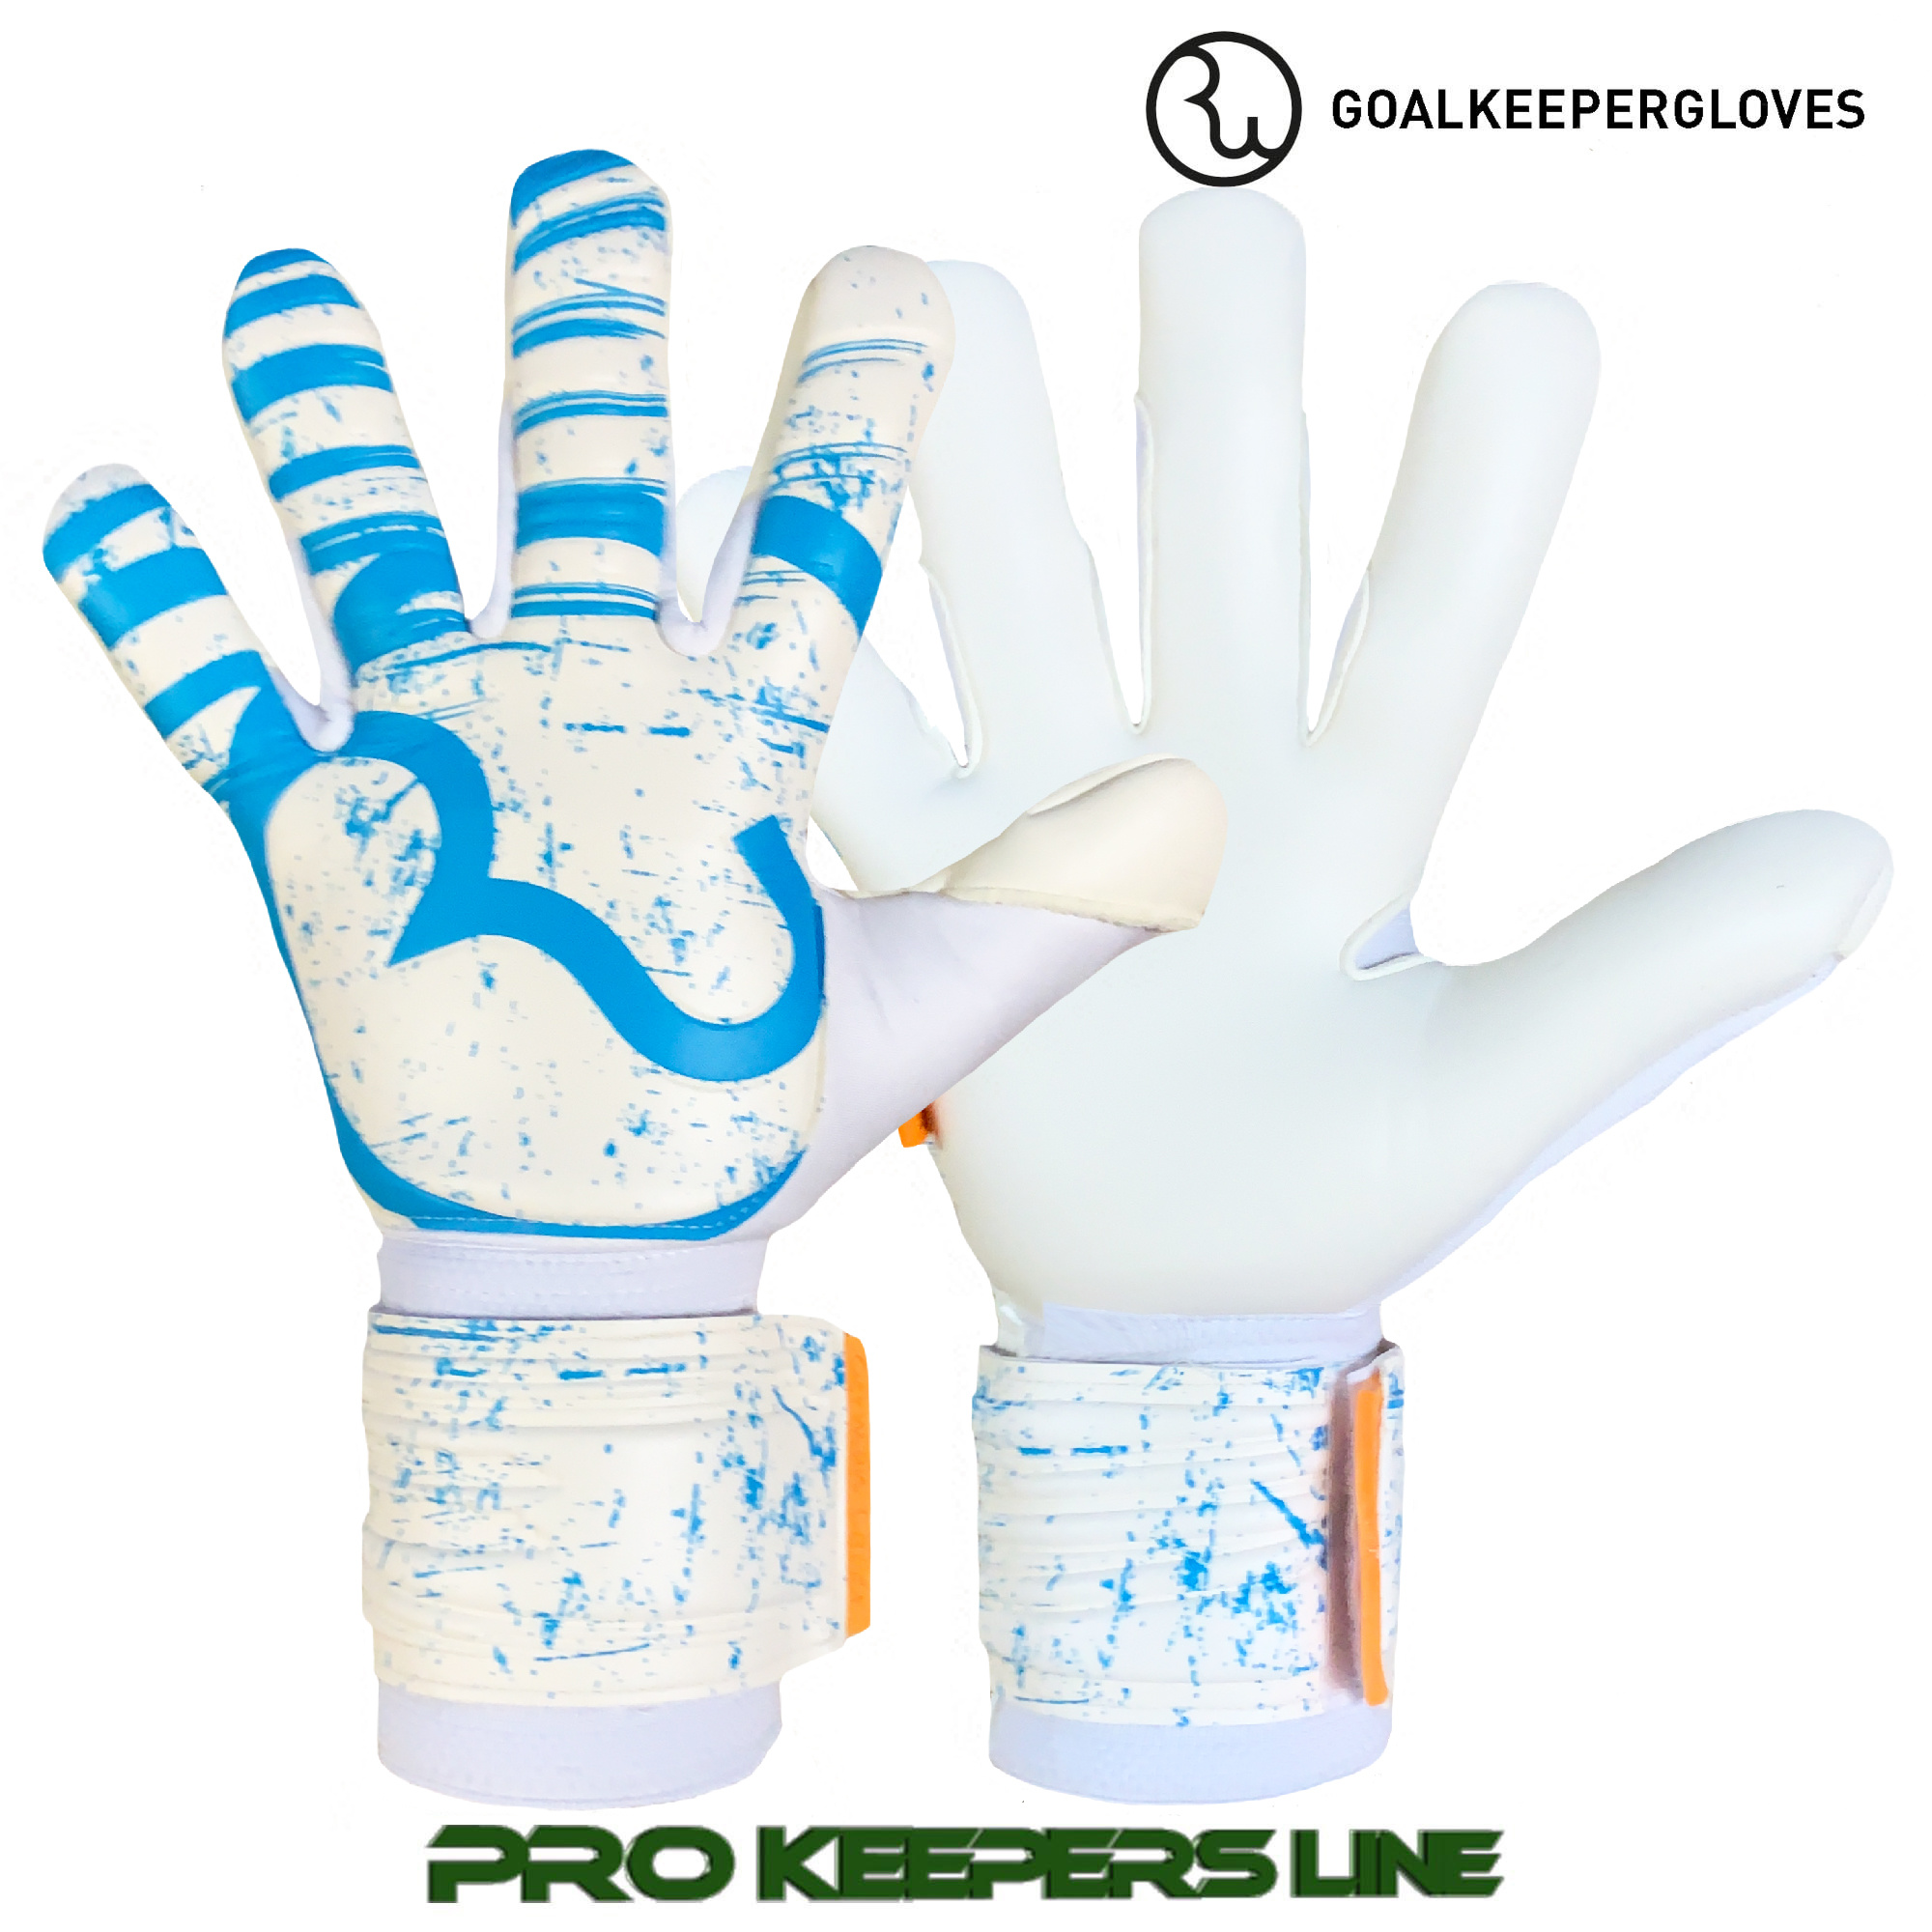 RWLK ONE TOUCH PICASSO WHITE/LIGHT BLUE